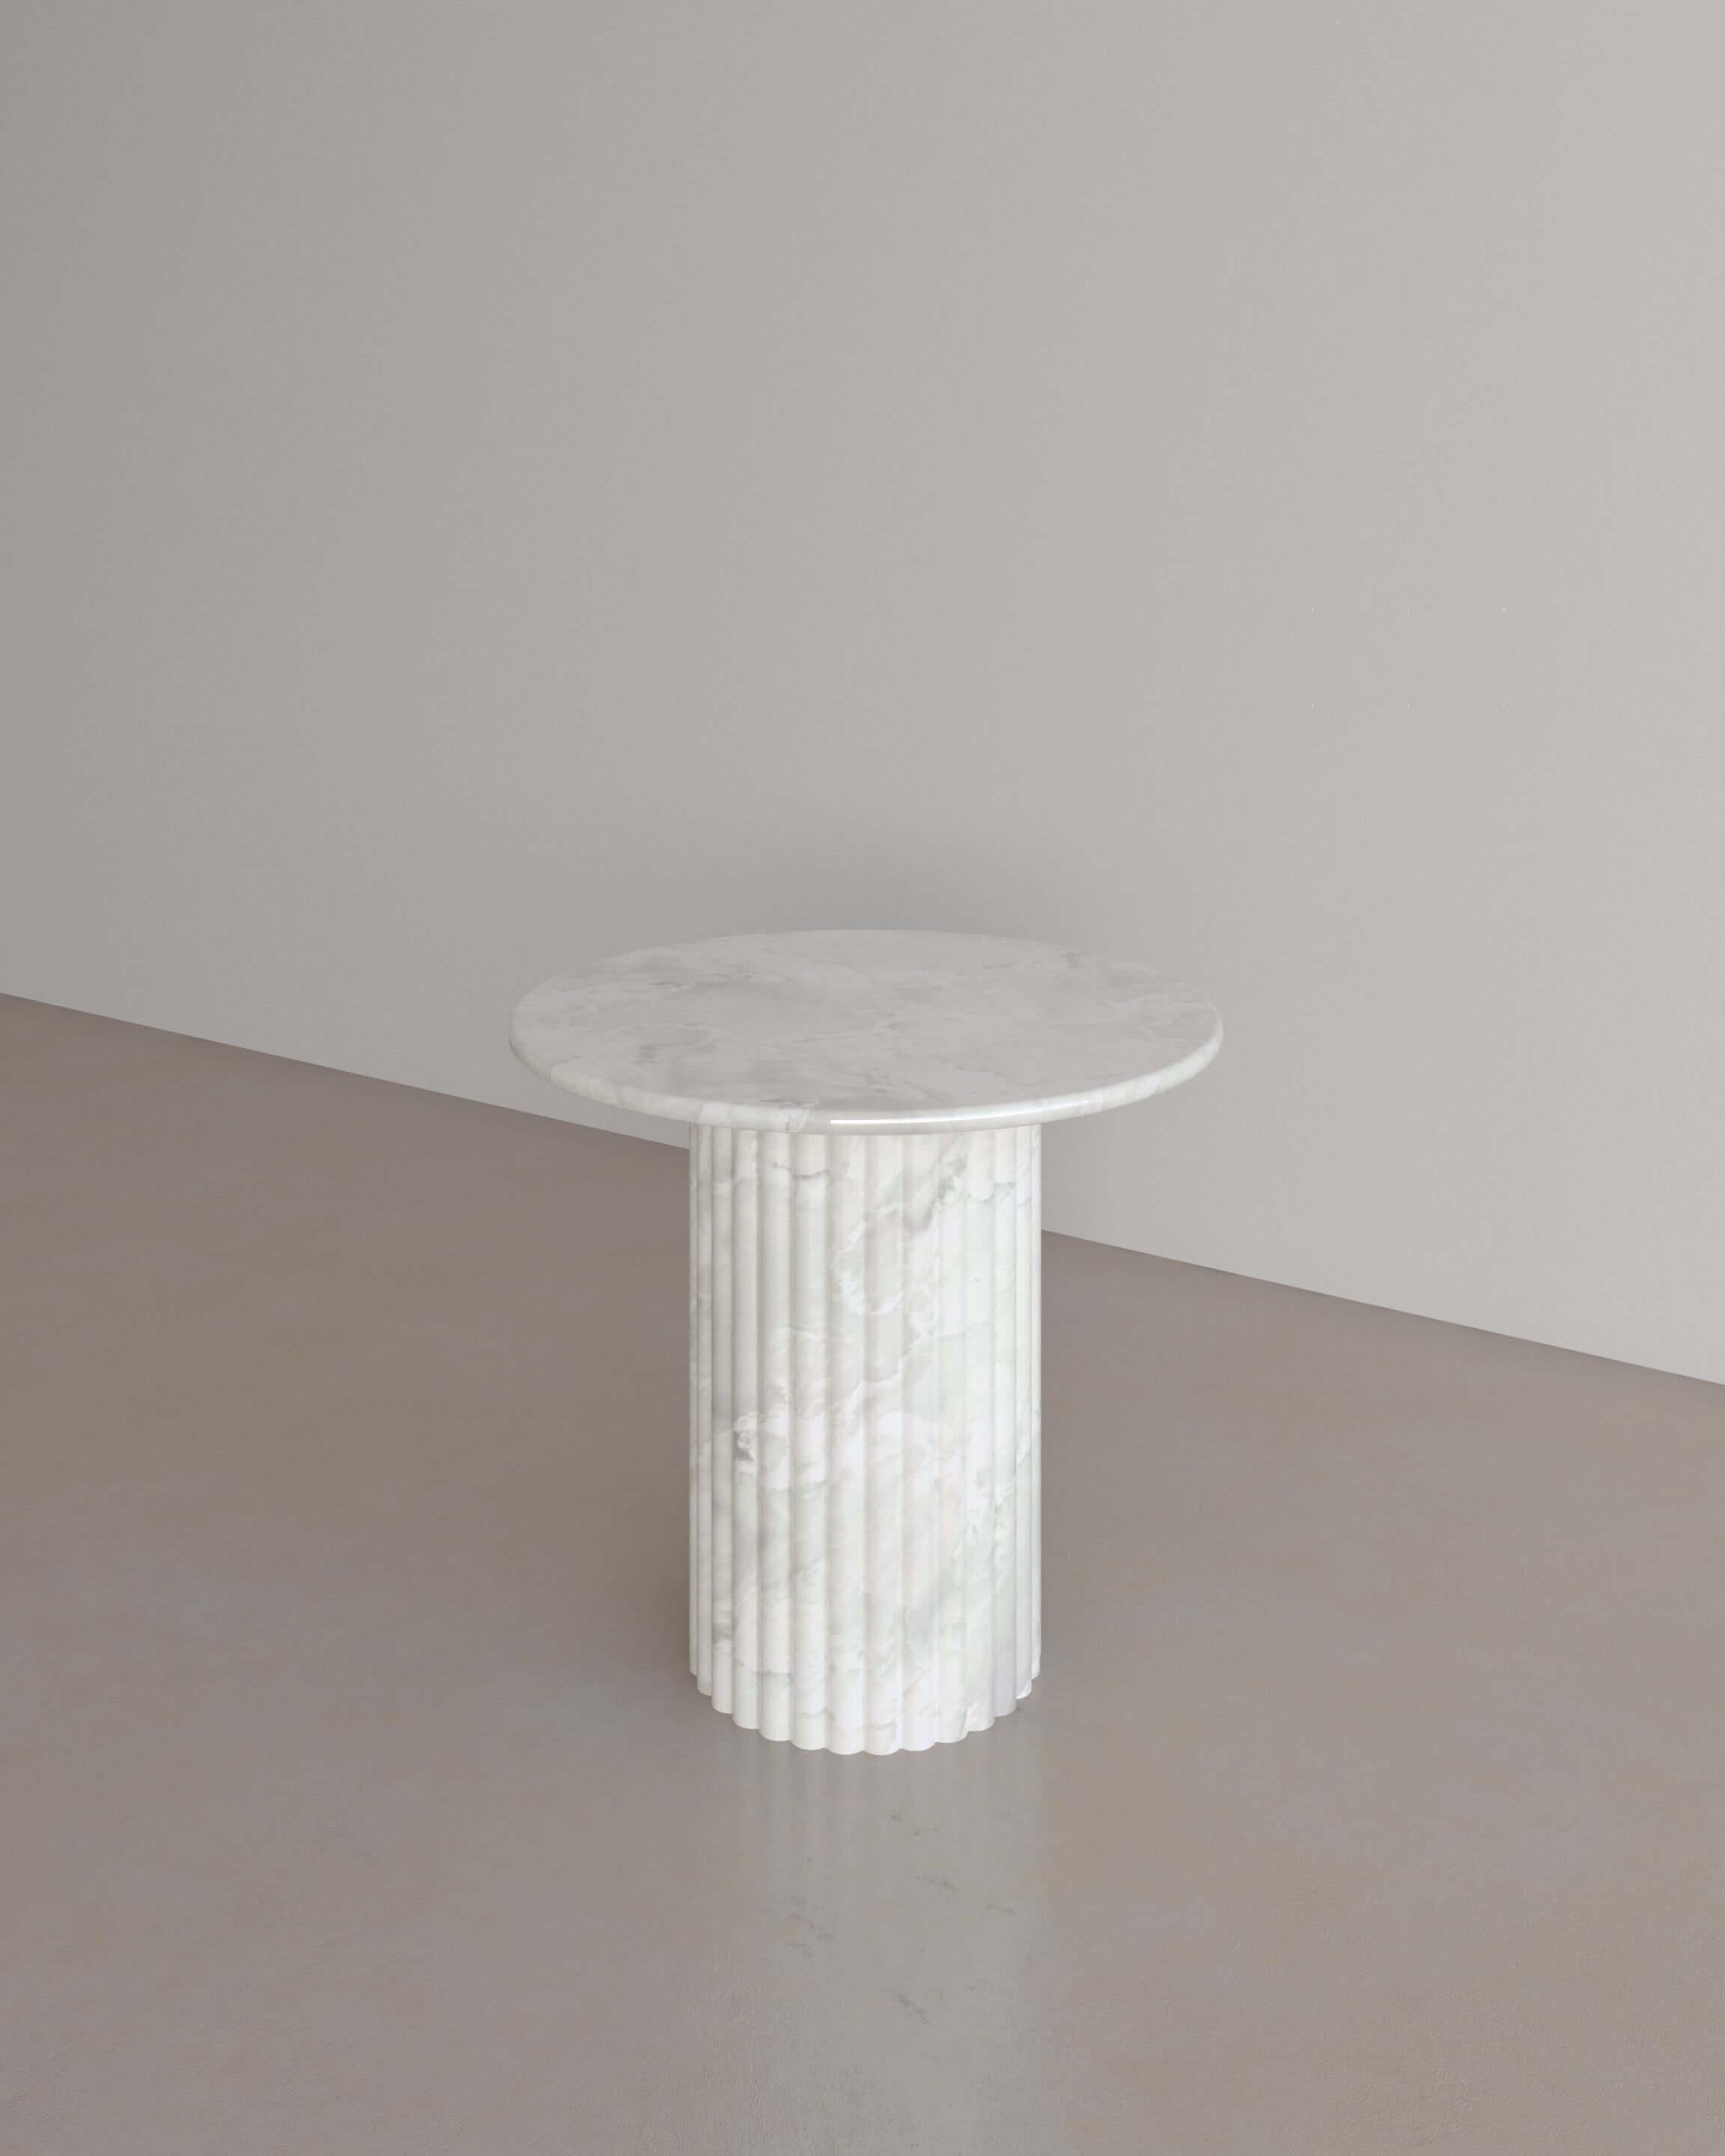 The Antica Occasional table in Bianco Onyx by The Essentialist displays a perfect synergy by viewing classical idealism through a modern lens. A traditional pillar supports a circular top with bullnose edges, crafted from whole natural stone.
The